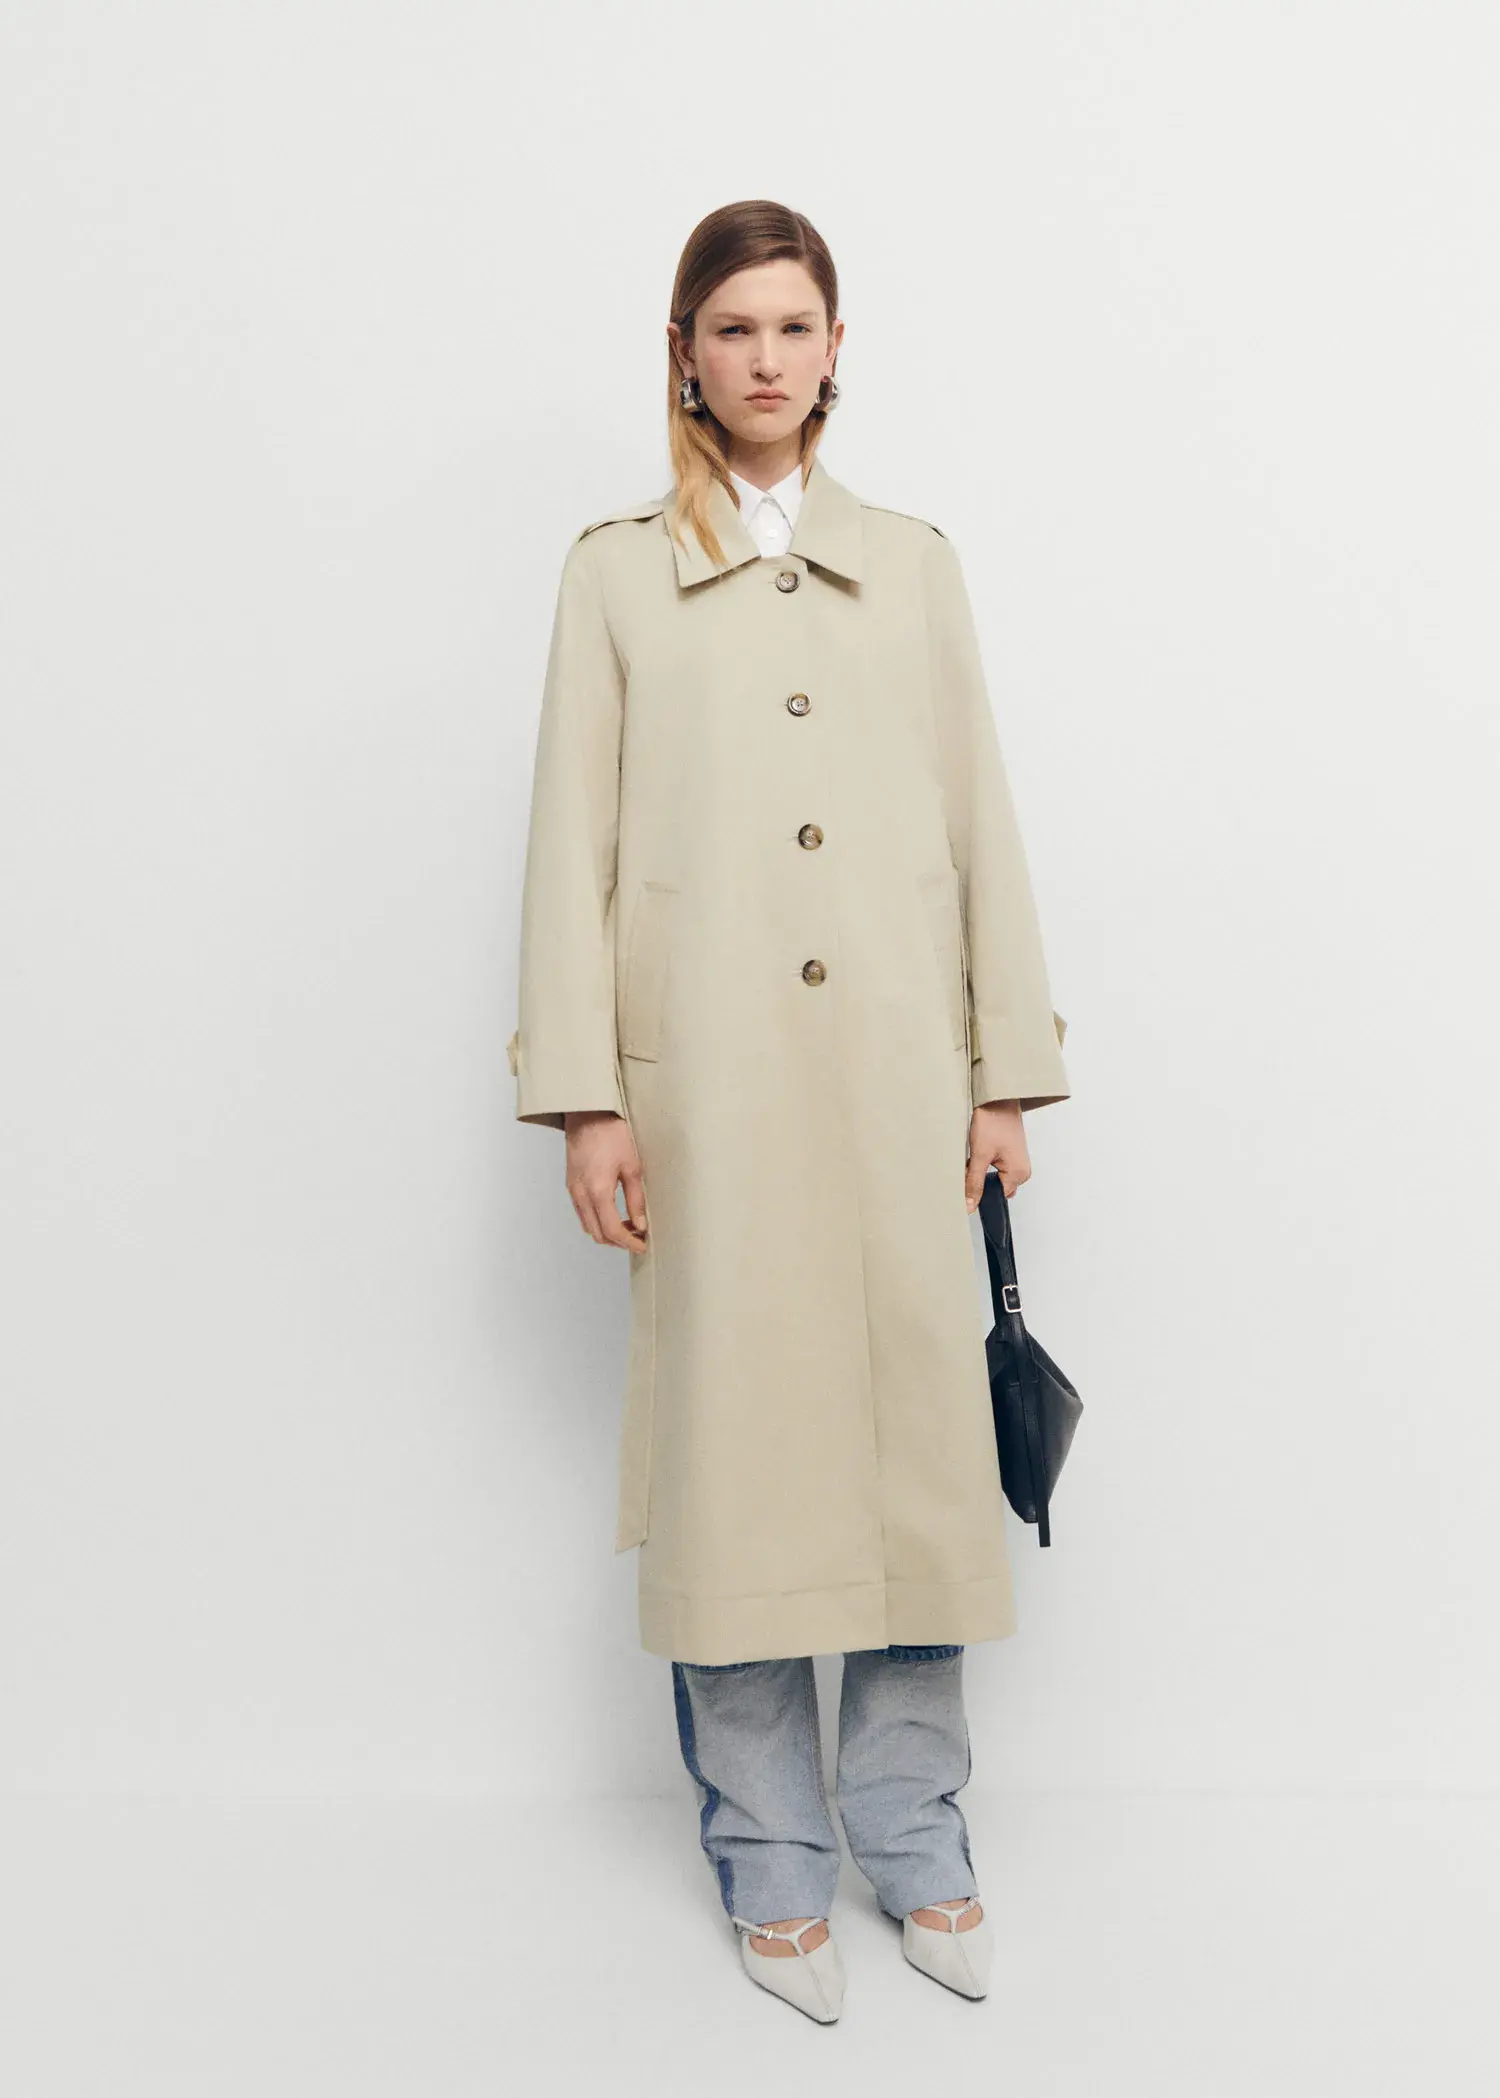 Mango Cotton trench coat with shirt collar. 3